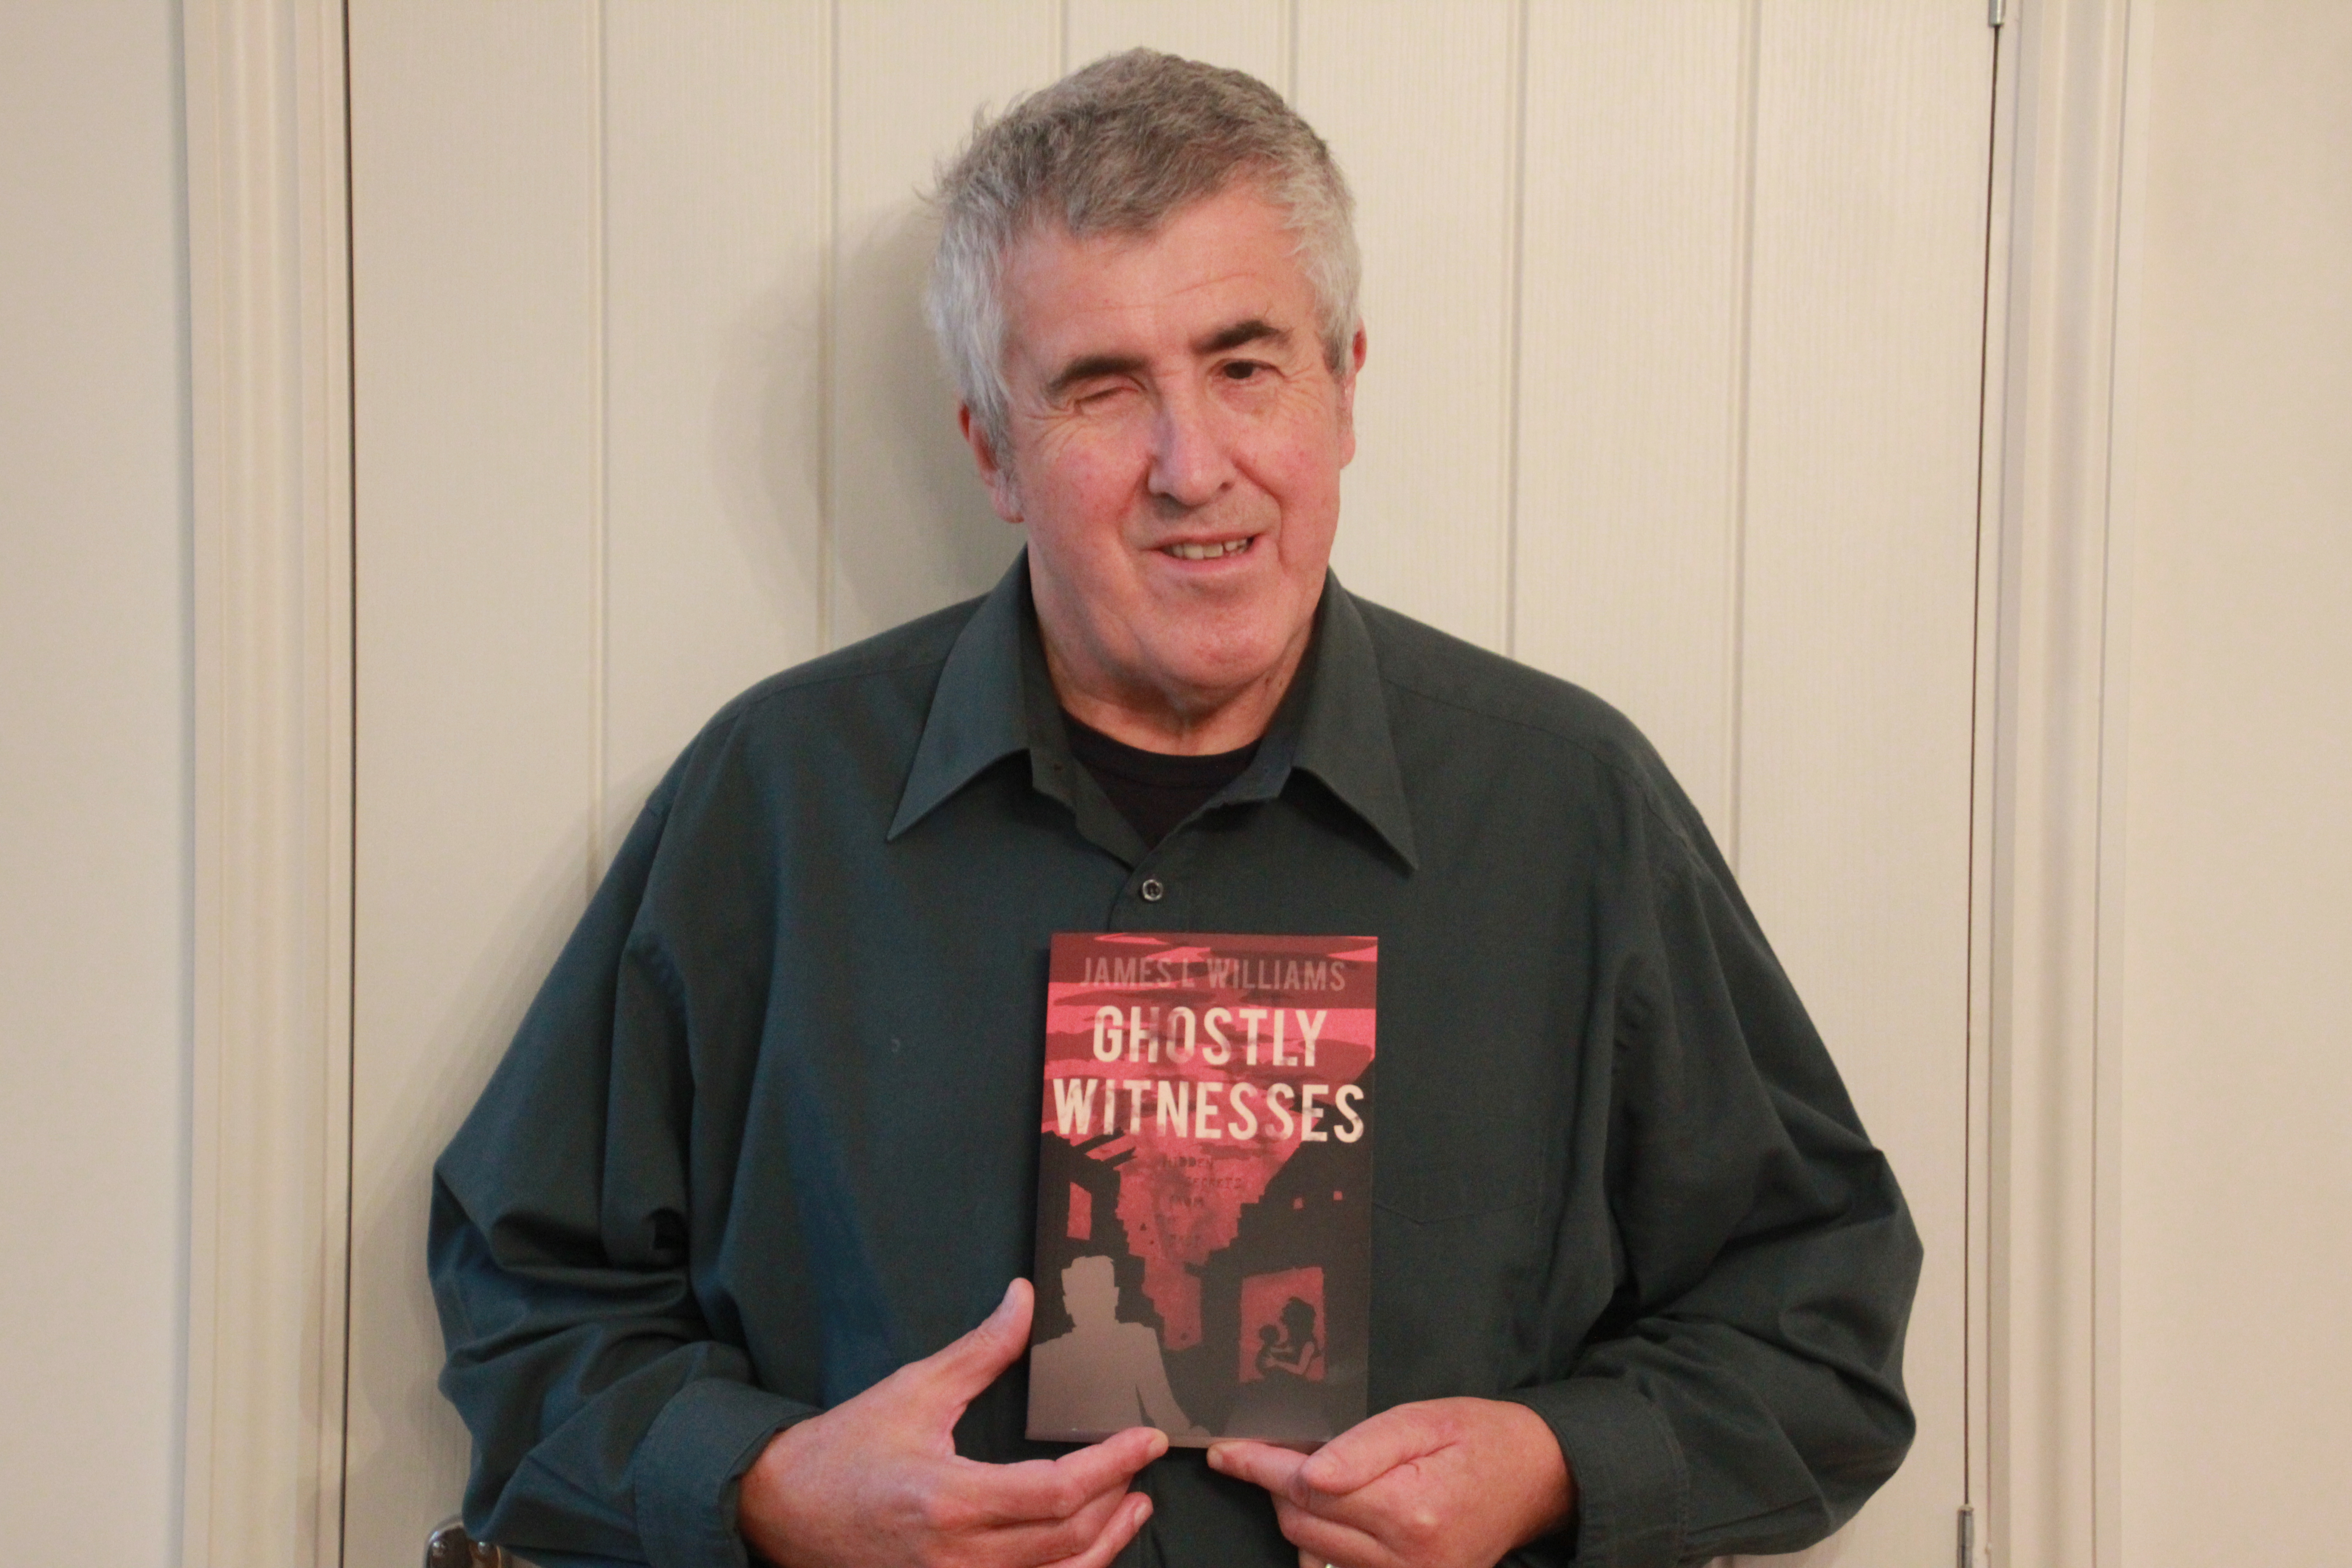 A picture of James Williams holding a copy of Ghostly Witnesses.